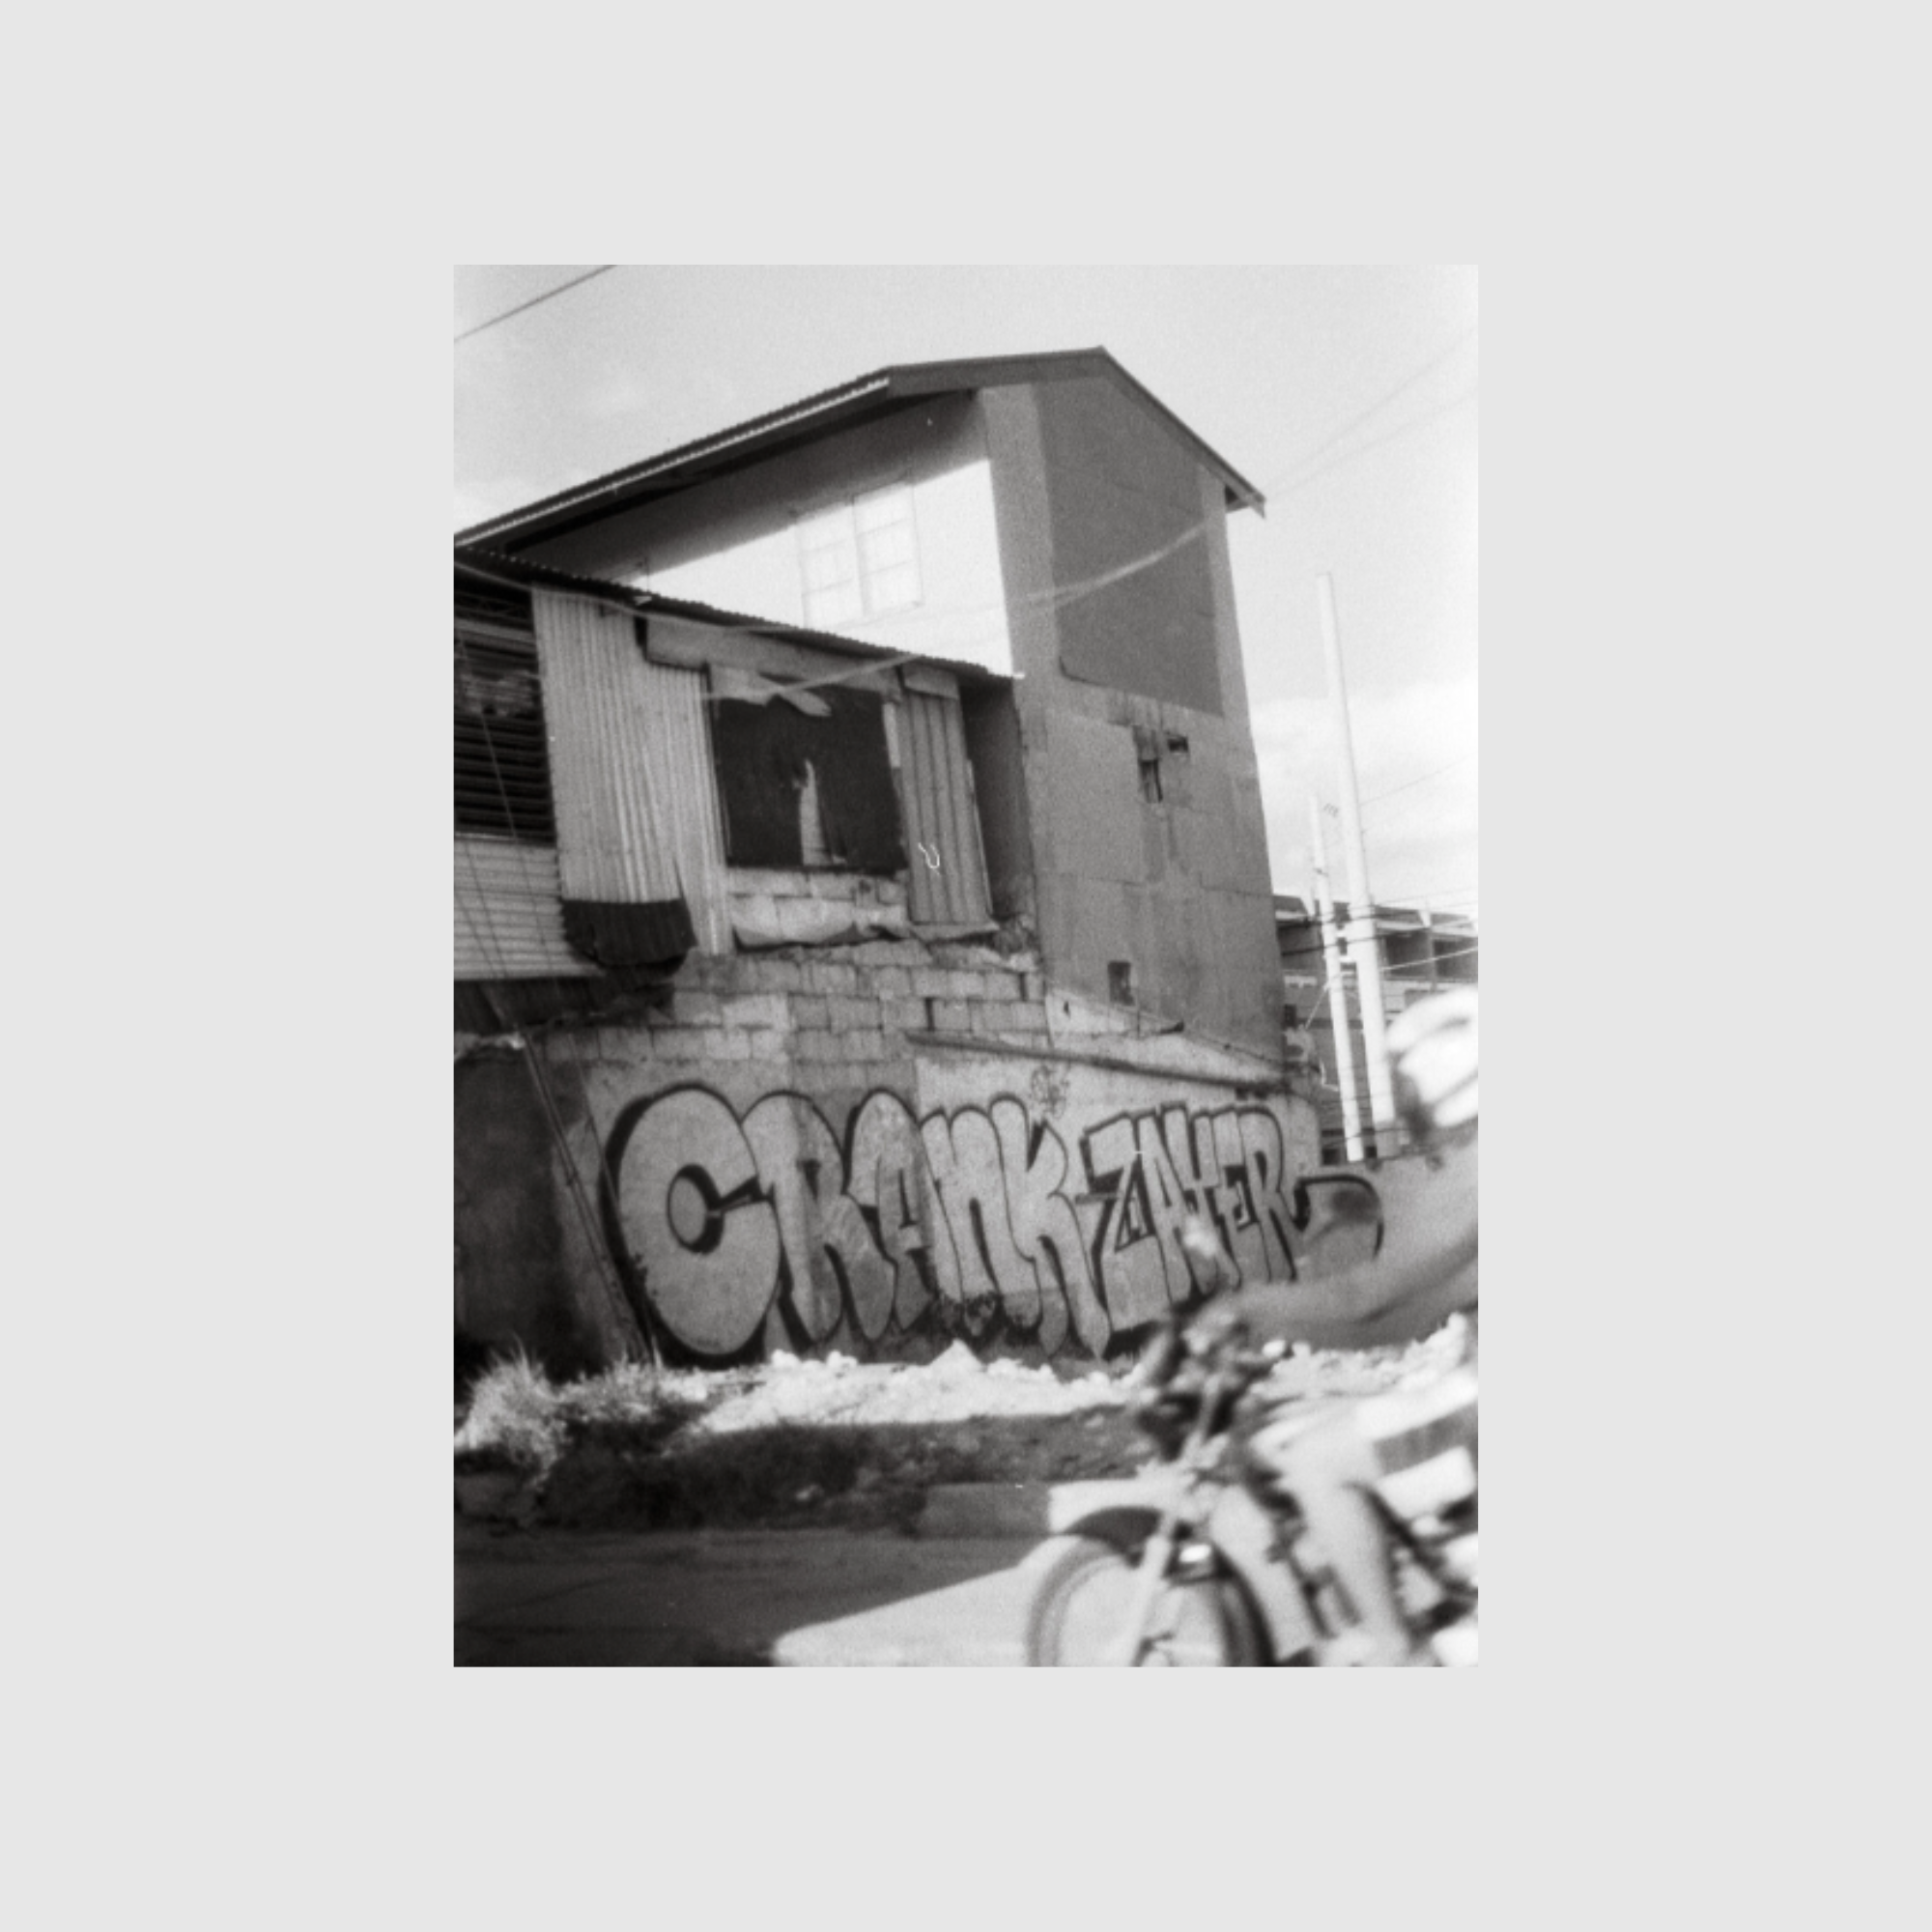 A black and white photo of a rundown building with graffiti reading "CRANKZAYER" on the wall. A person on a motorcycle is blurred in the foreground.